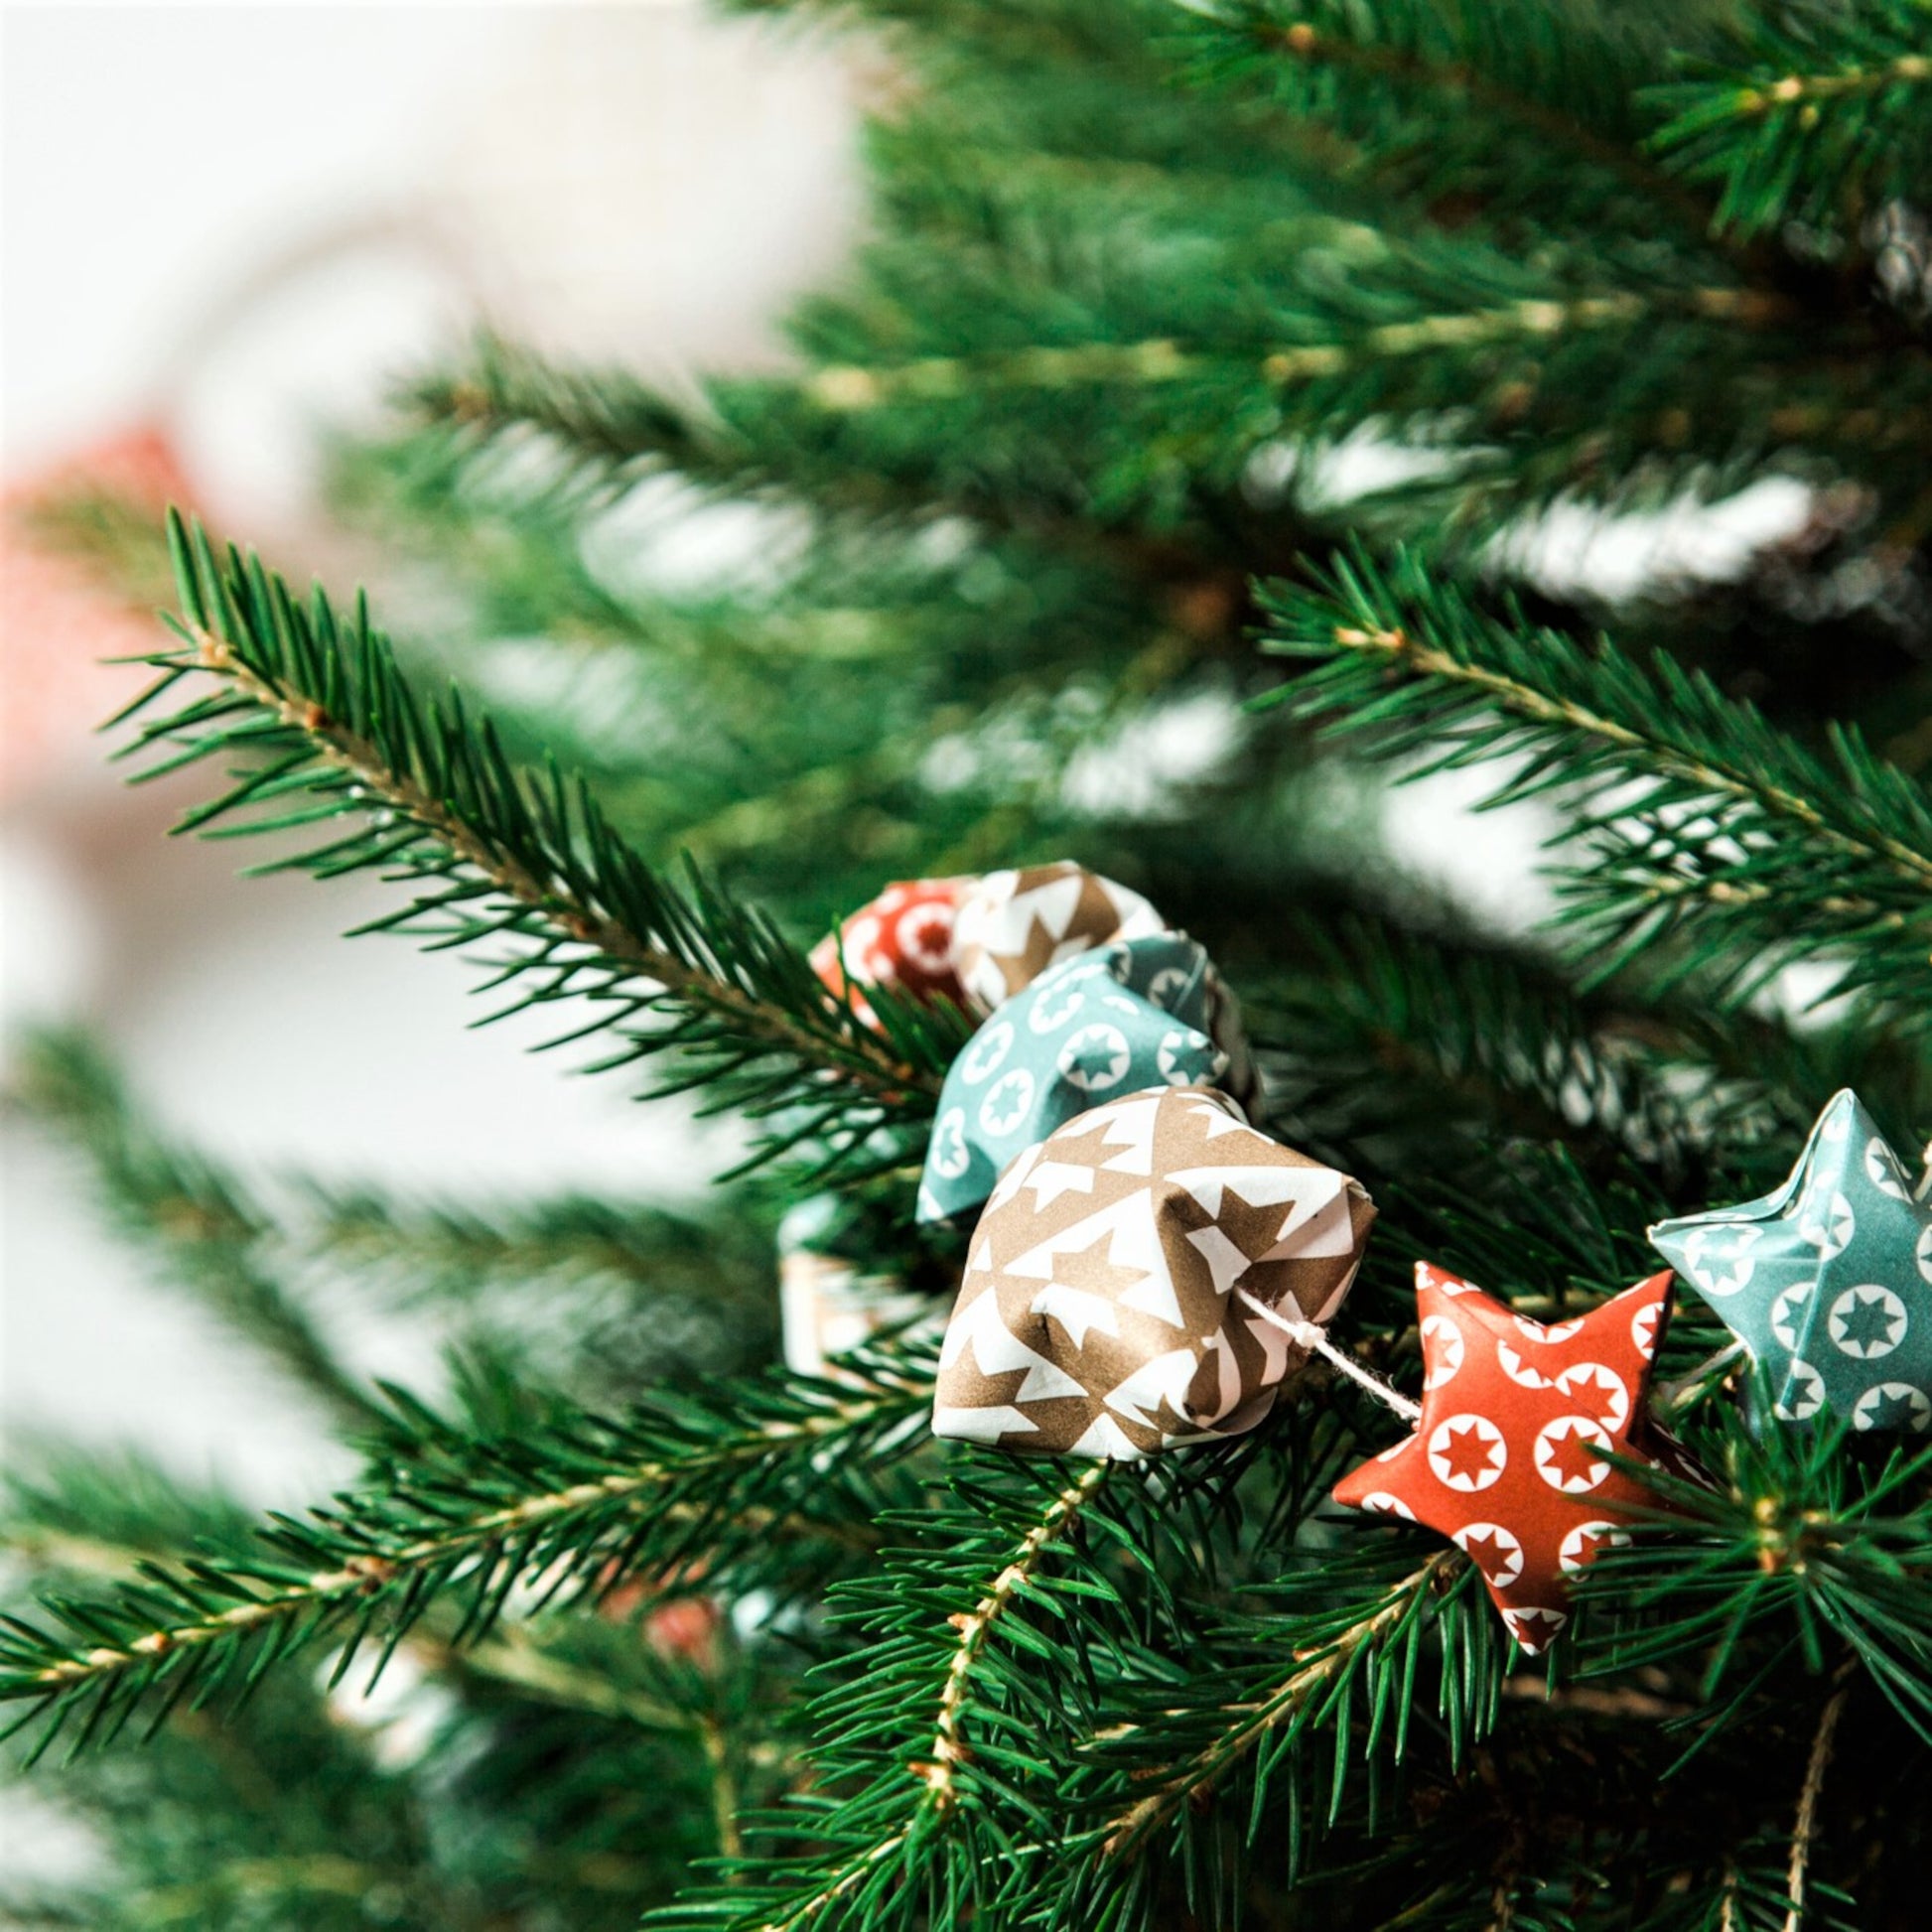 A garland of small paper origami patterned stars "lucky stars" in red, gold and aqua, pictured decorating a christmas tree